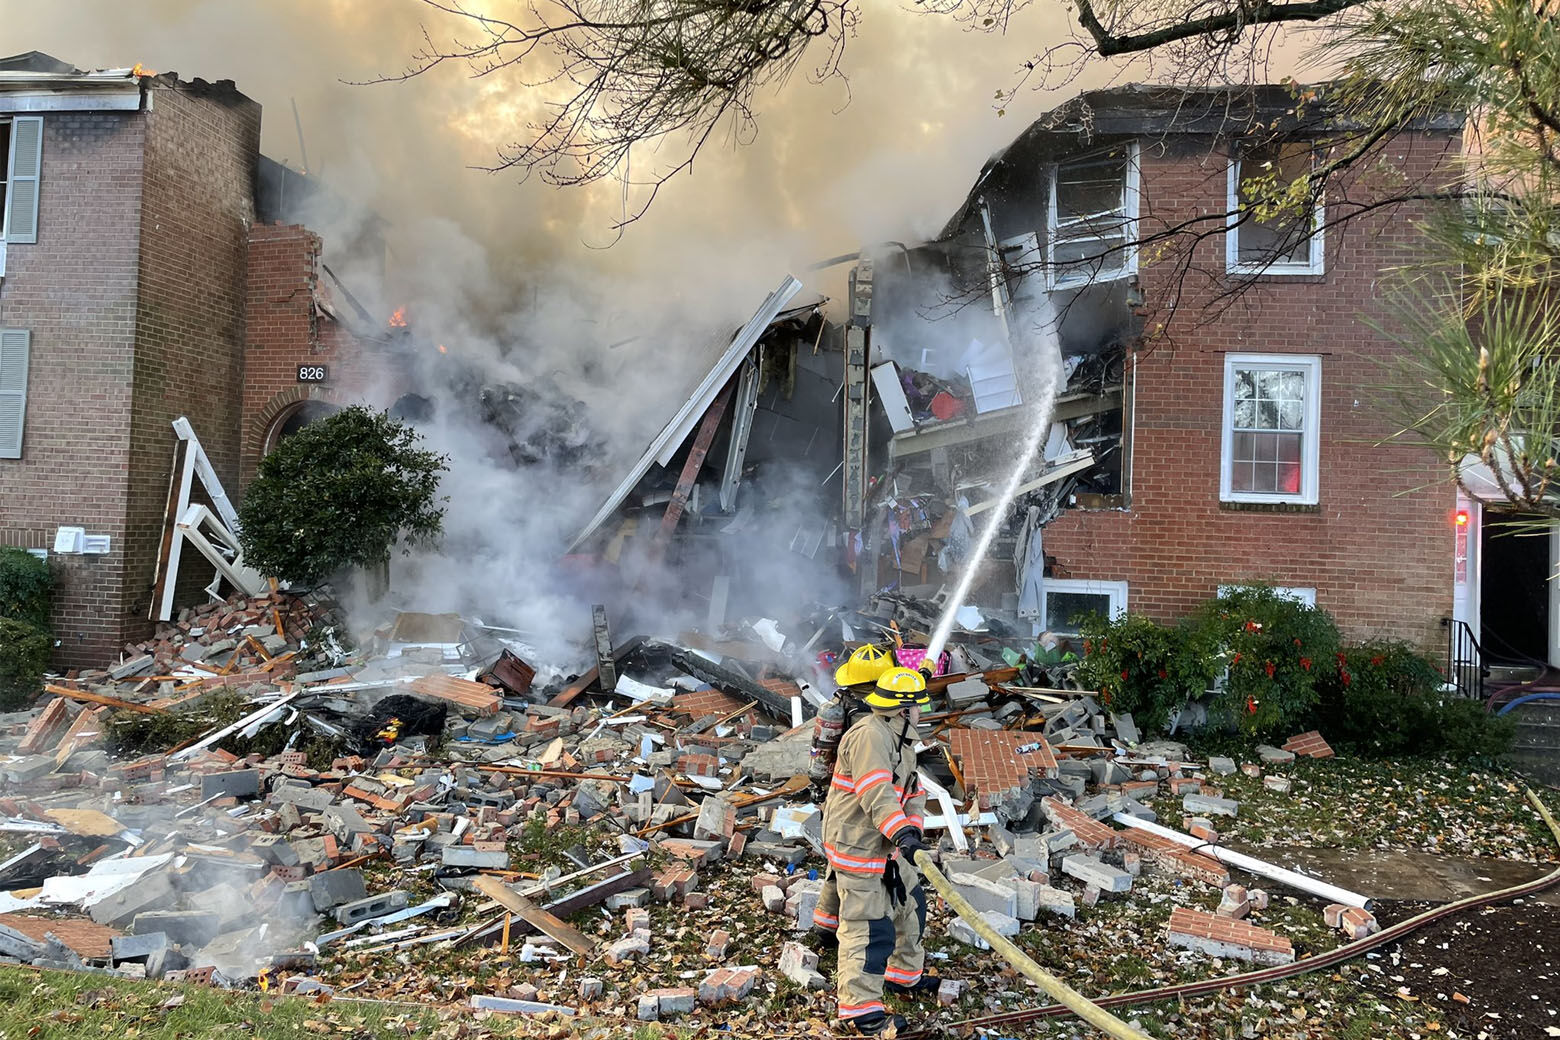 Montgomery County, Maryland, fire department officials say they are responding to a fire and explosion at a building in Gaithersburg Wednesday morning.(Courtesy Montgomery County Fire and Rescue)